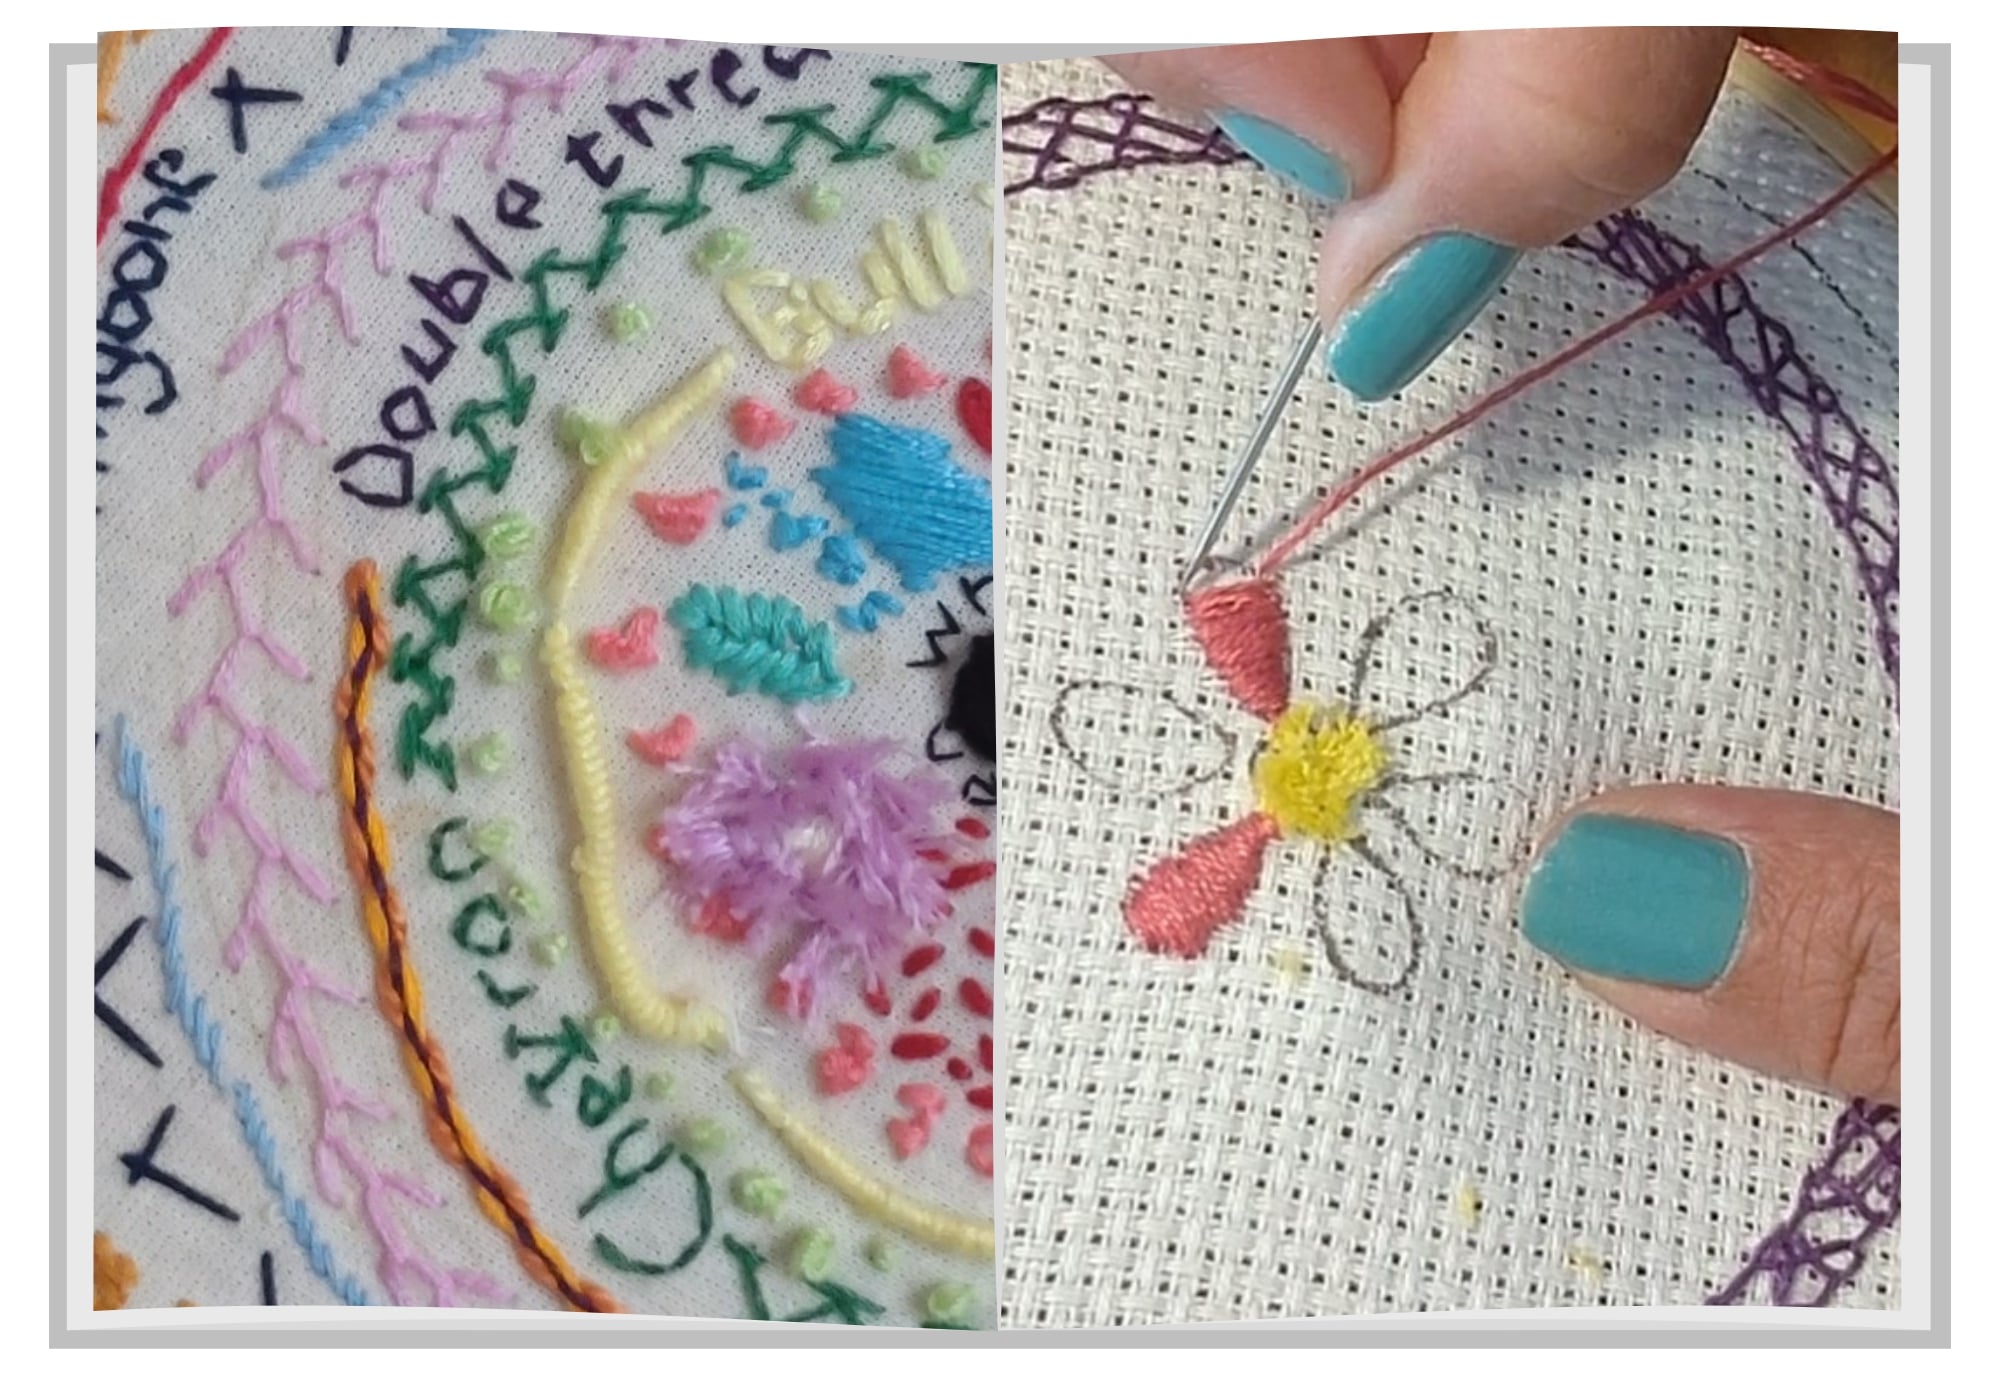 Workshop – Adult Embroidery